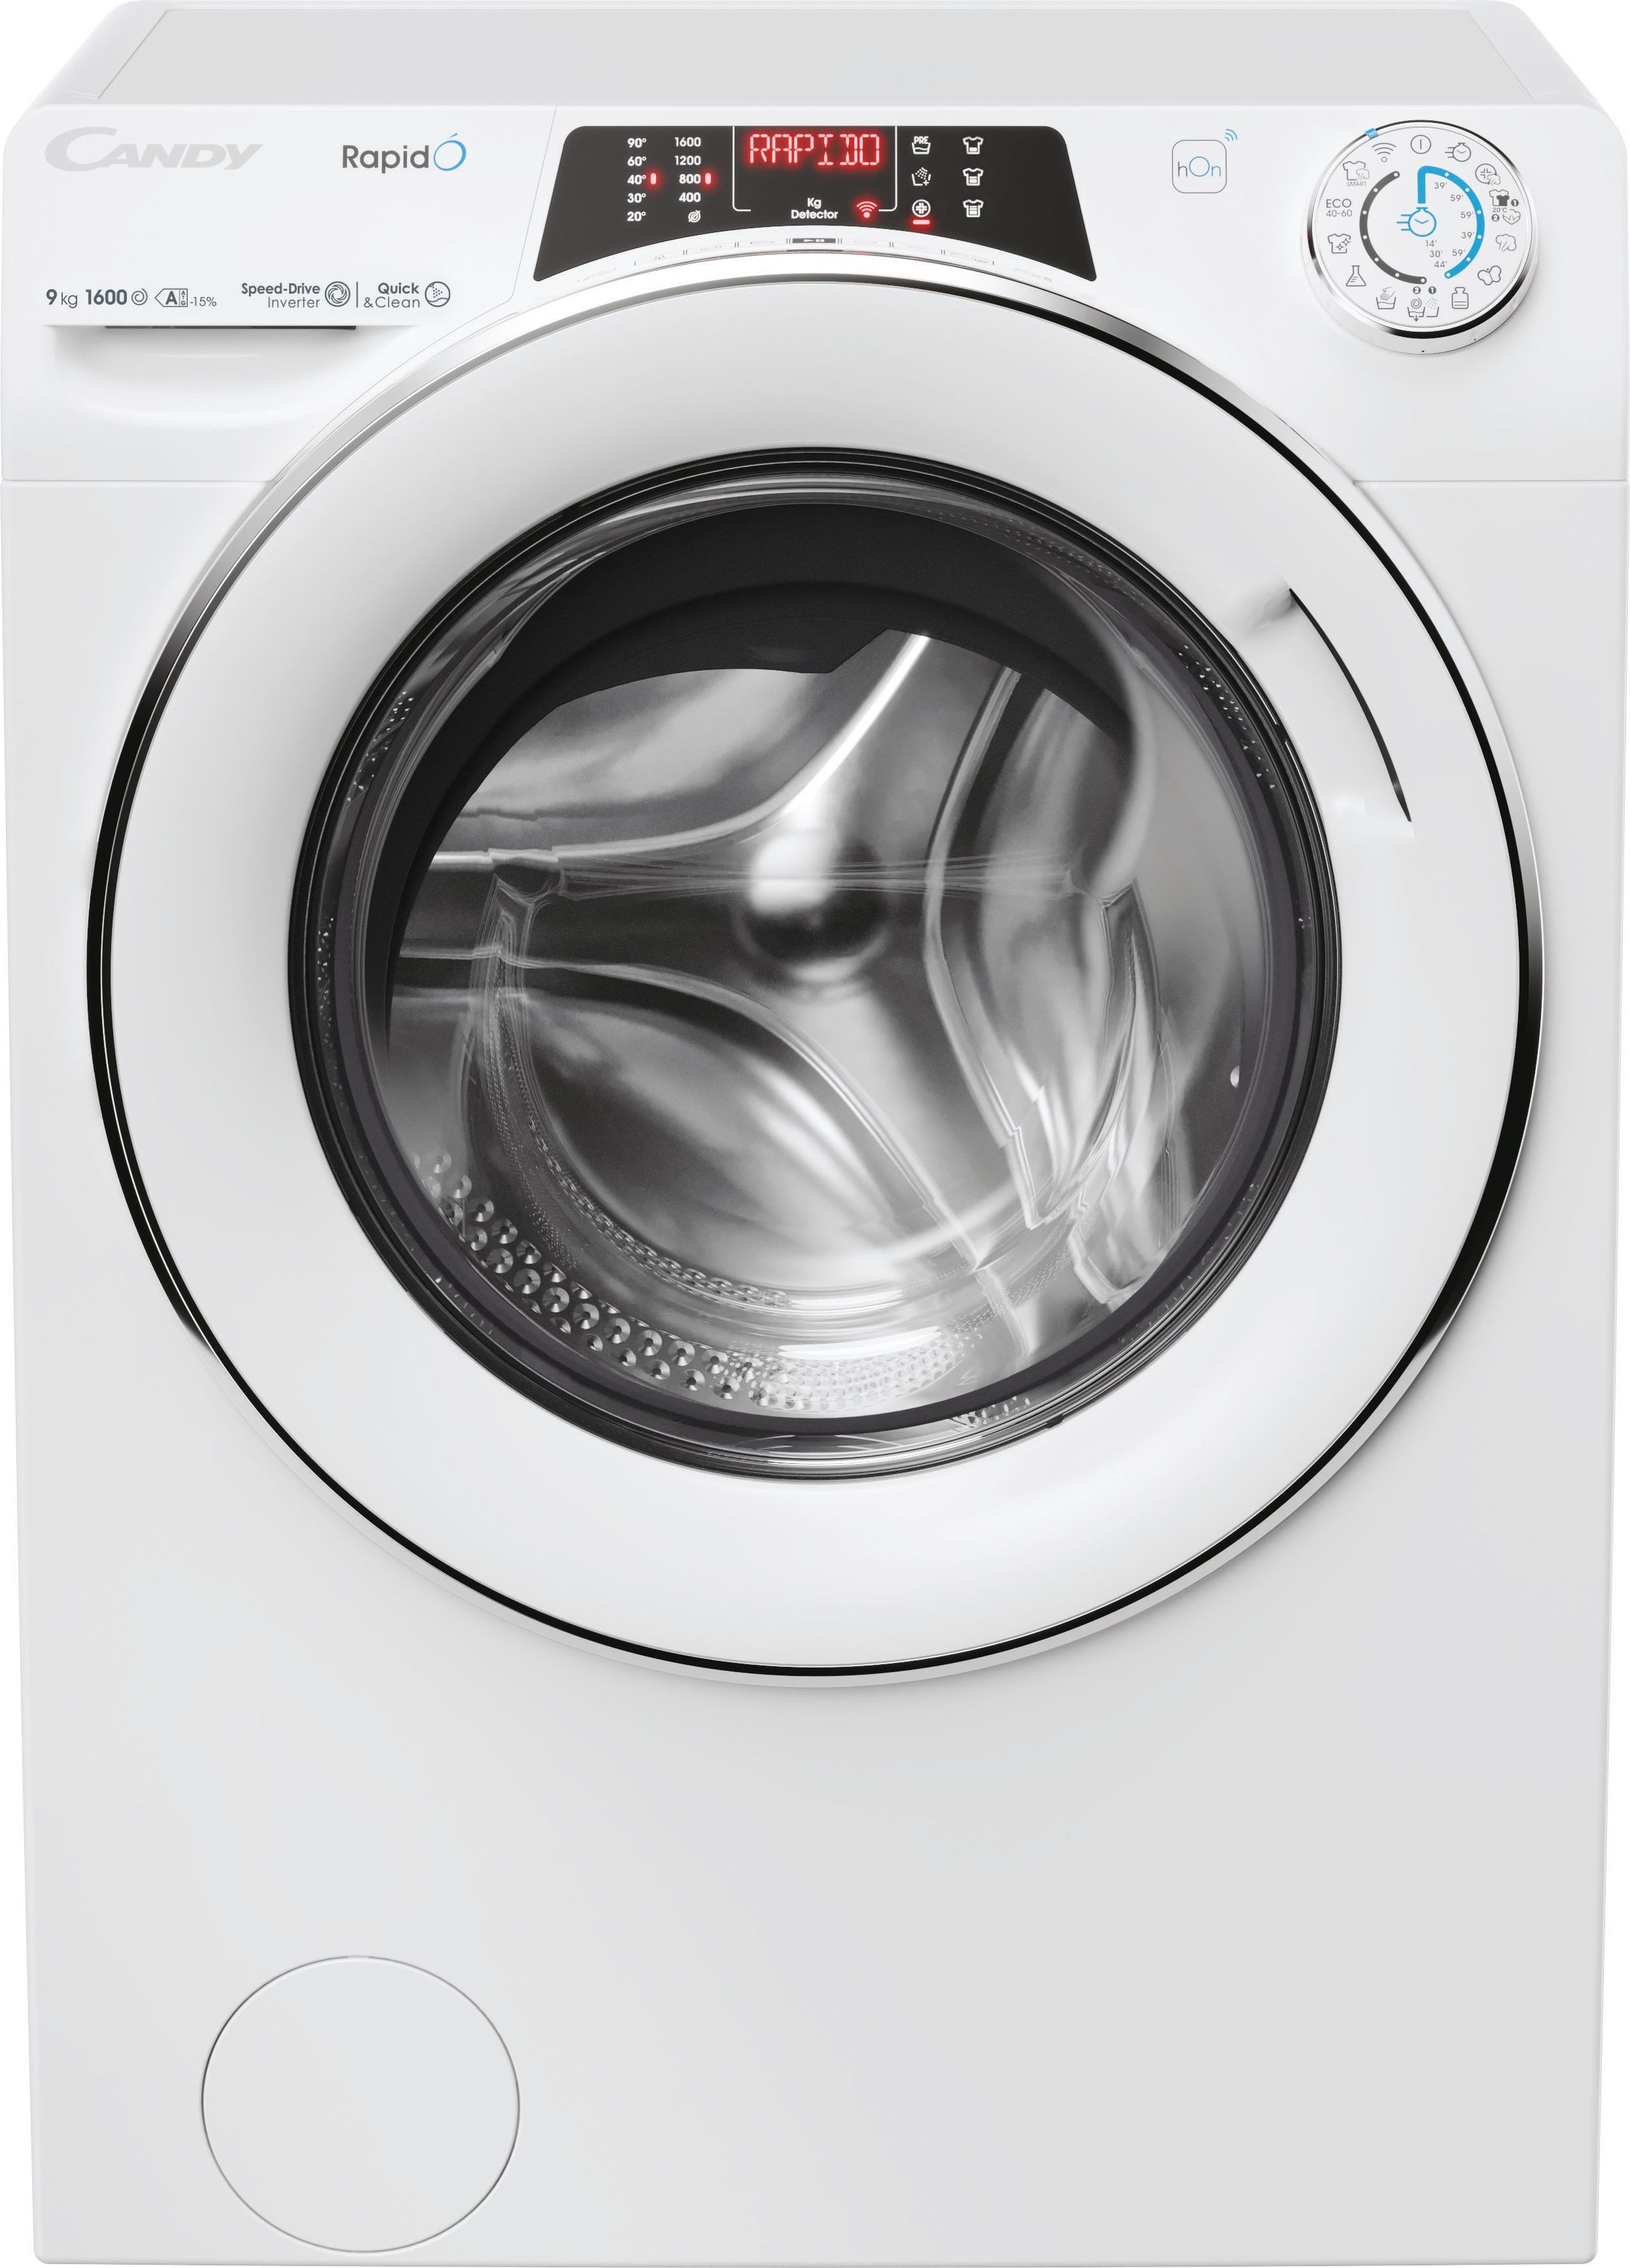 Candy Rapid RO1696DWMC7/1-80 9kg Washing Machine with 1600 rpm - White - A Rated, White